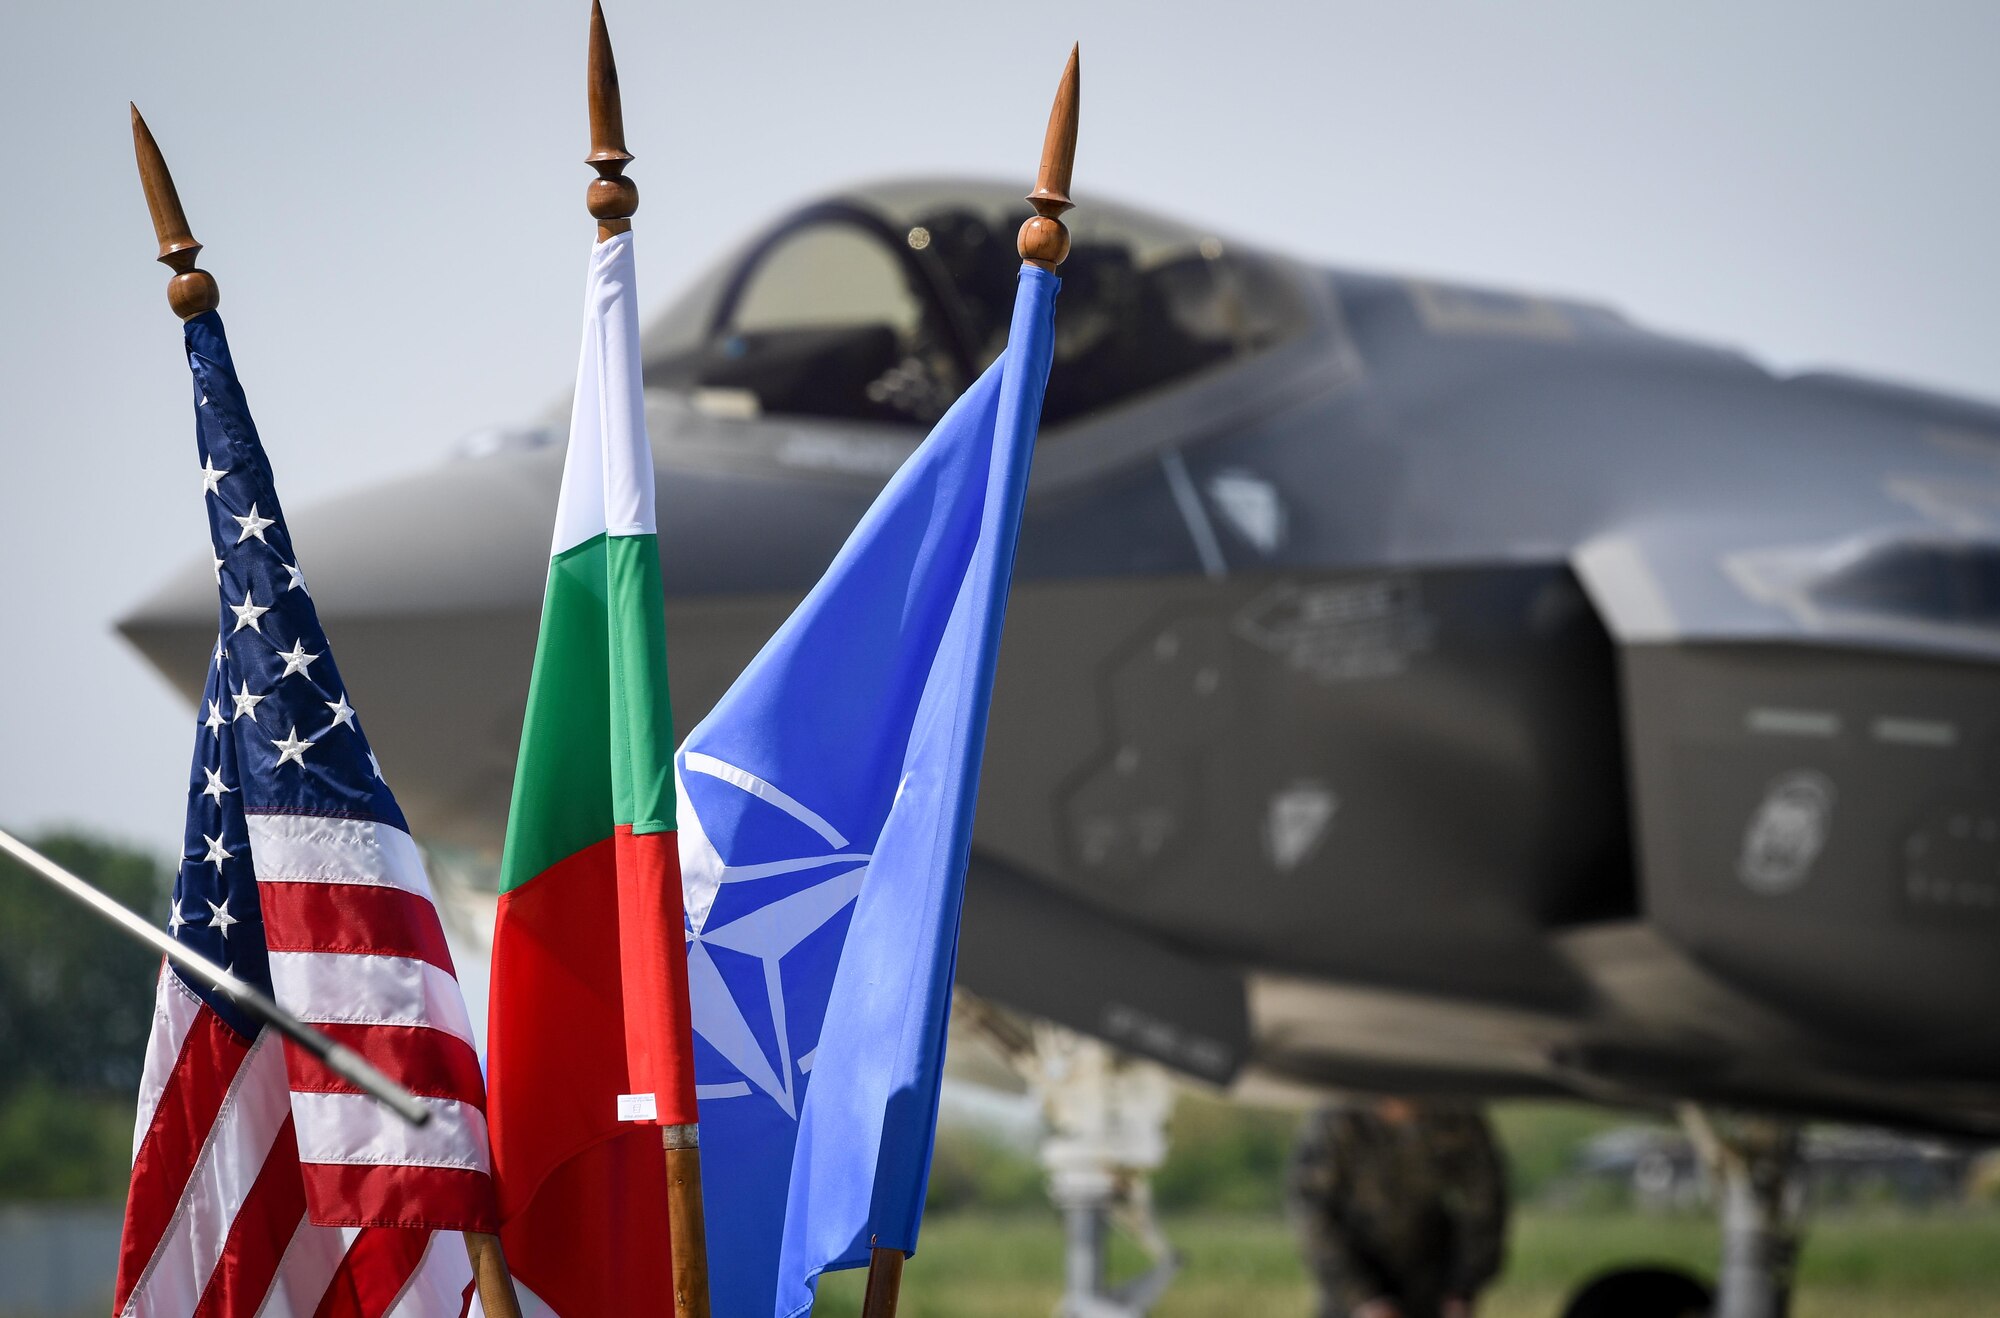 A U.S. Air Force F-35A Lightning II aircraft arrives at Graf Ignatievo Air Base, Bulgaria, April 28, 2017, marking the first time the NATO country has hosted the 5th generation fighter aircraft. Eight F-35s deployed from Hill Air Force Base, Utah to RAF Lakenheath, England on April 15. Two of the eight forward deployed to Bulgaria for a brief time which allowed the F-35s to engage in familiarization training within the European theater while reassuring allies and partners of U.S. dedication to the enduring peace and stability of the region. The F-35s are assigned to the 34th Fighter Squadron and are supported by total force Airmen from the 388th Fighter Wing, and the Air Force Reserve’s 466th Fighter Squadron, 419th Fighter Wing, Hill Air Force Base, Utah. A KC-135 Stratotanker assigned to the 459th Air Refueling Wing provided the aerial refueling capability allowing the aircraft to fly non-stop to their destination. (U.S. Air Force photo by Tech. Sgt. Ryan Crane) 